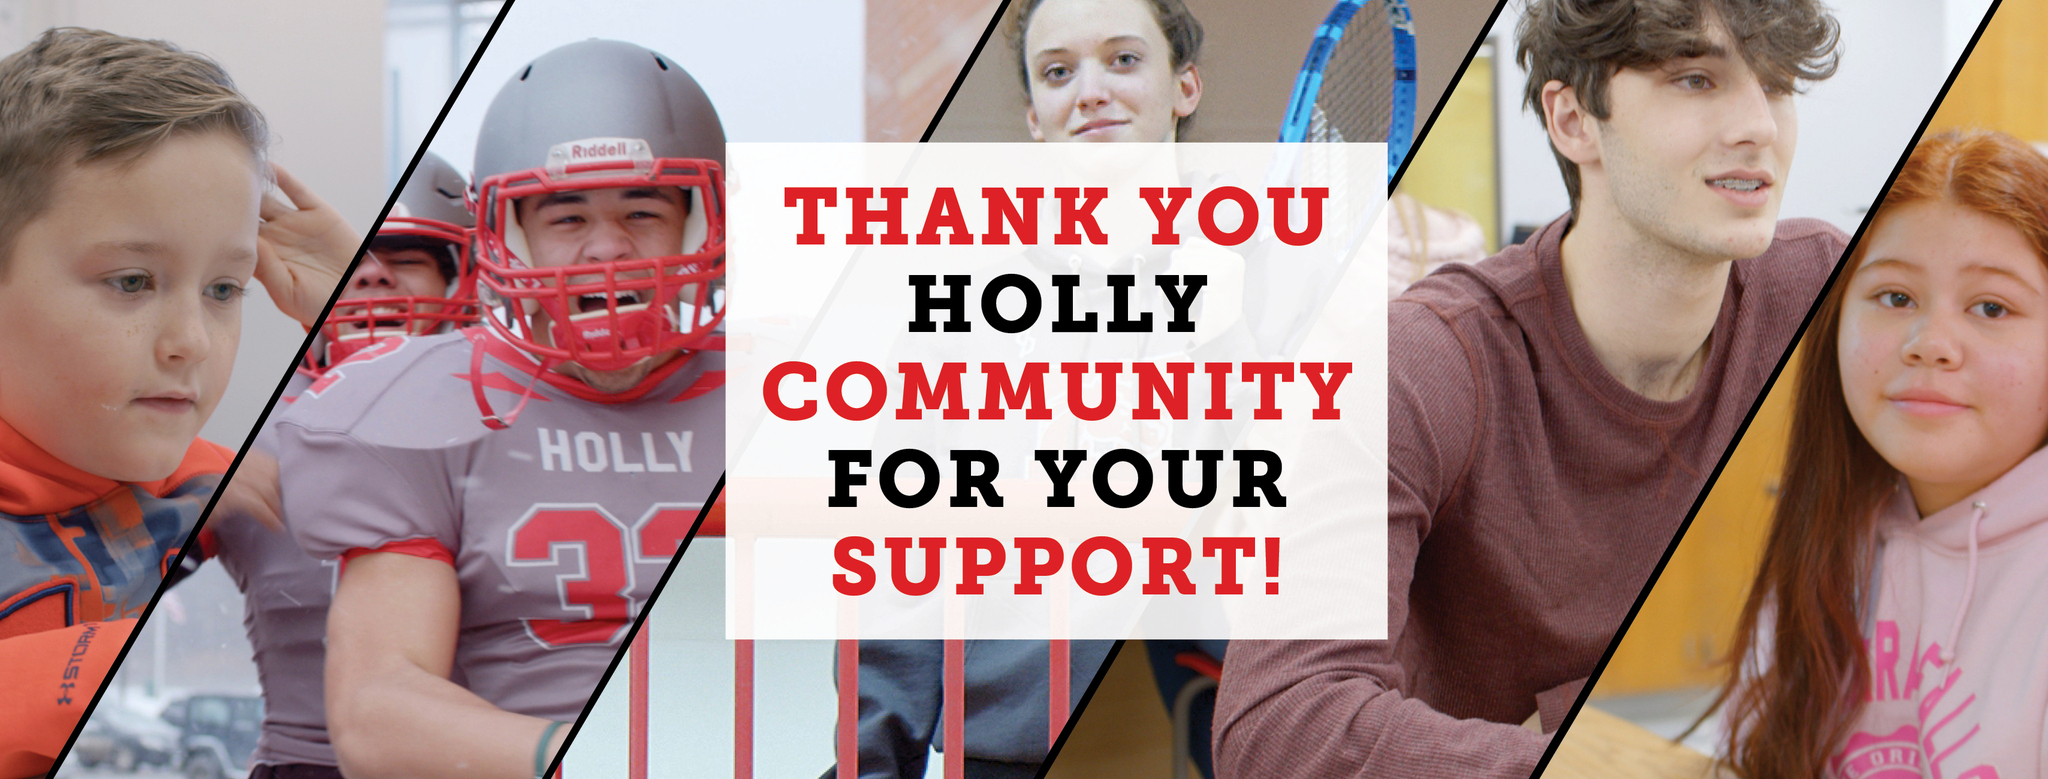 Thank you holly community for your support image